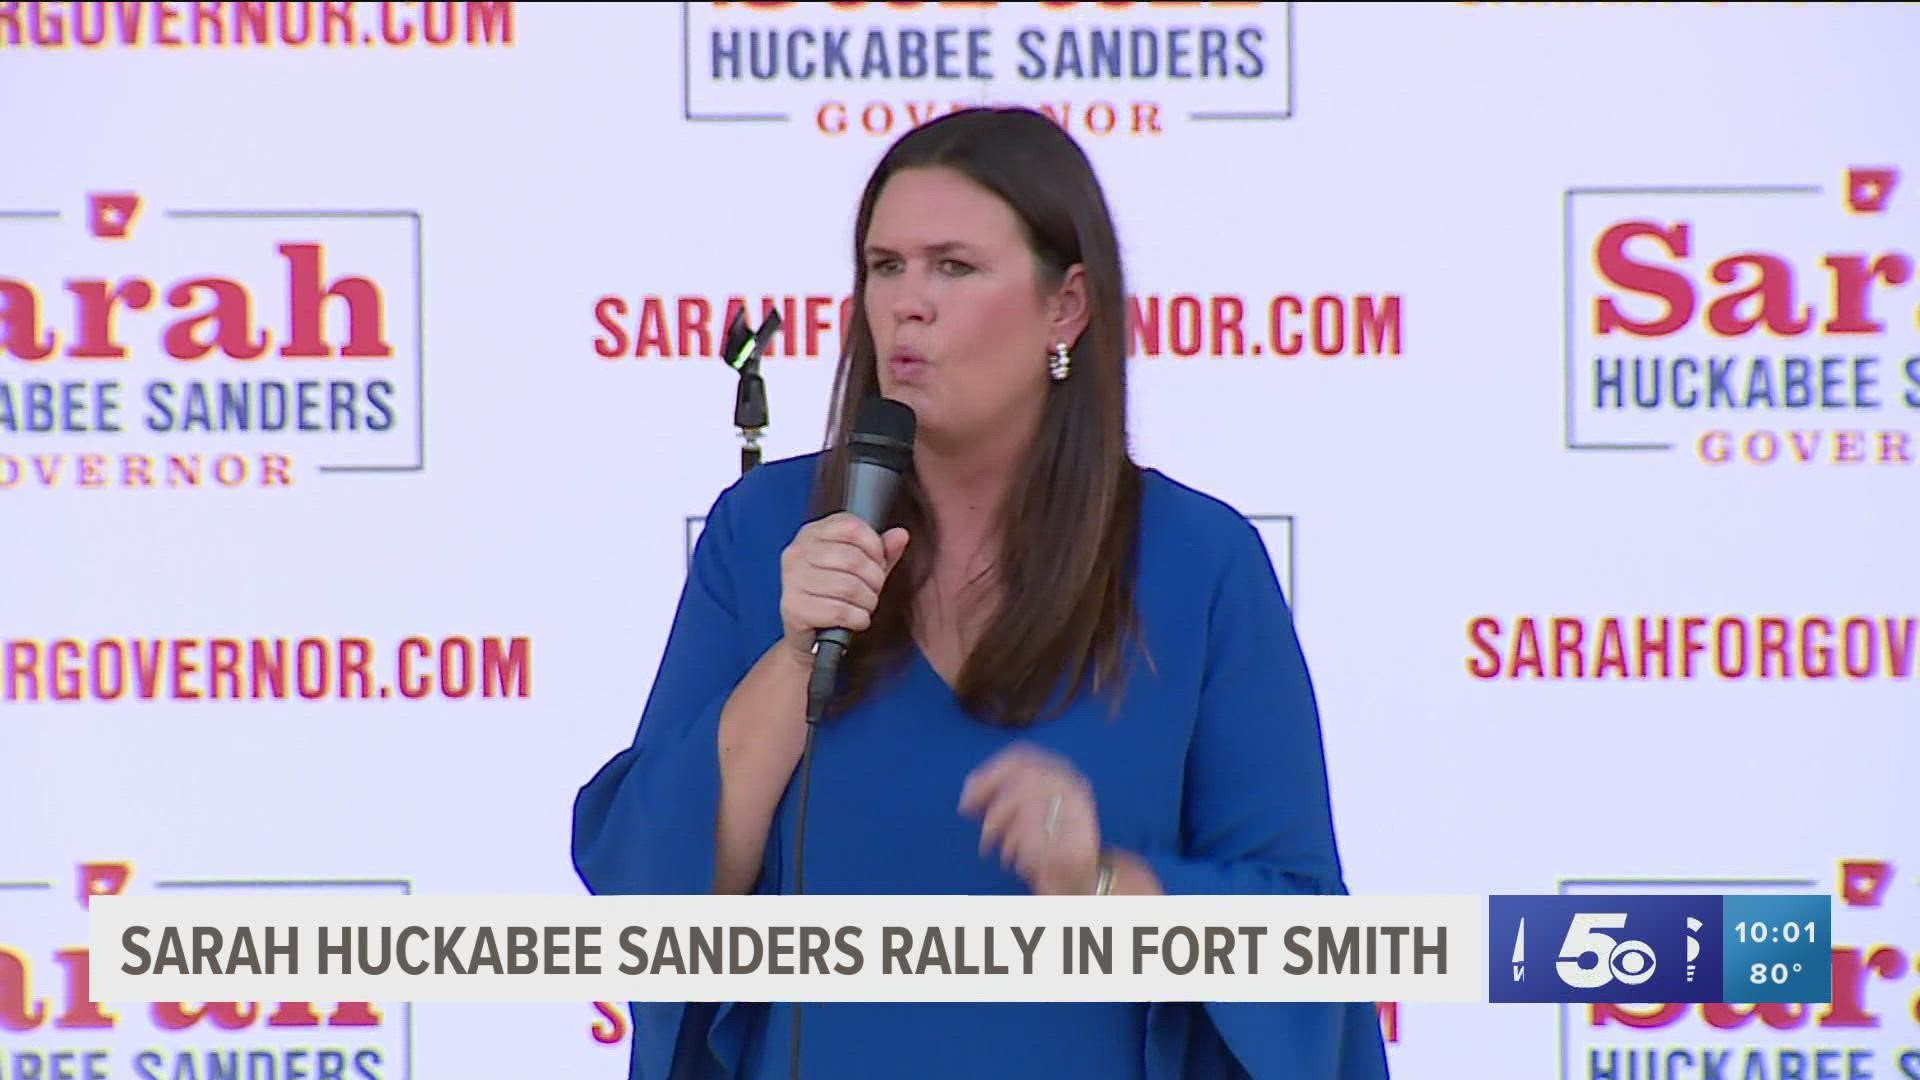 The Former White House Press Secretary's rally was a part of her 15-stop freedom tour across Arkansas to promote her run for Governor.